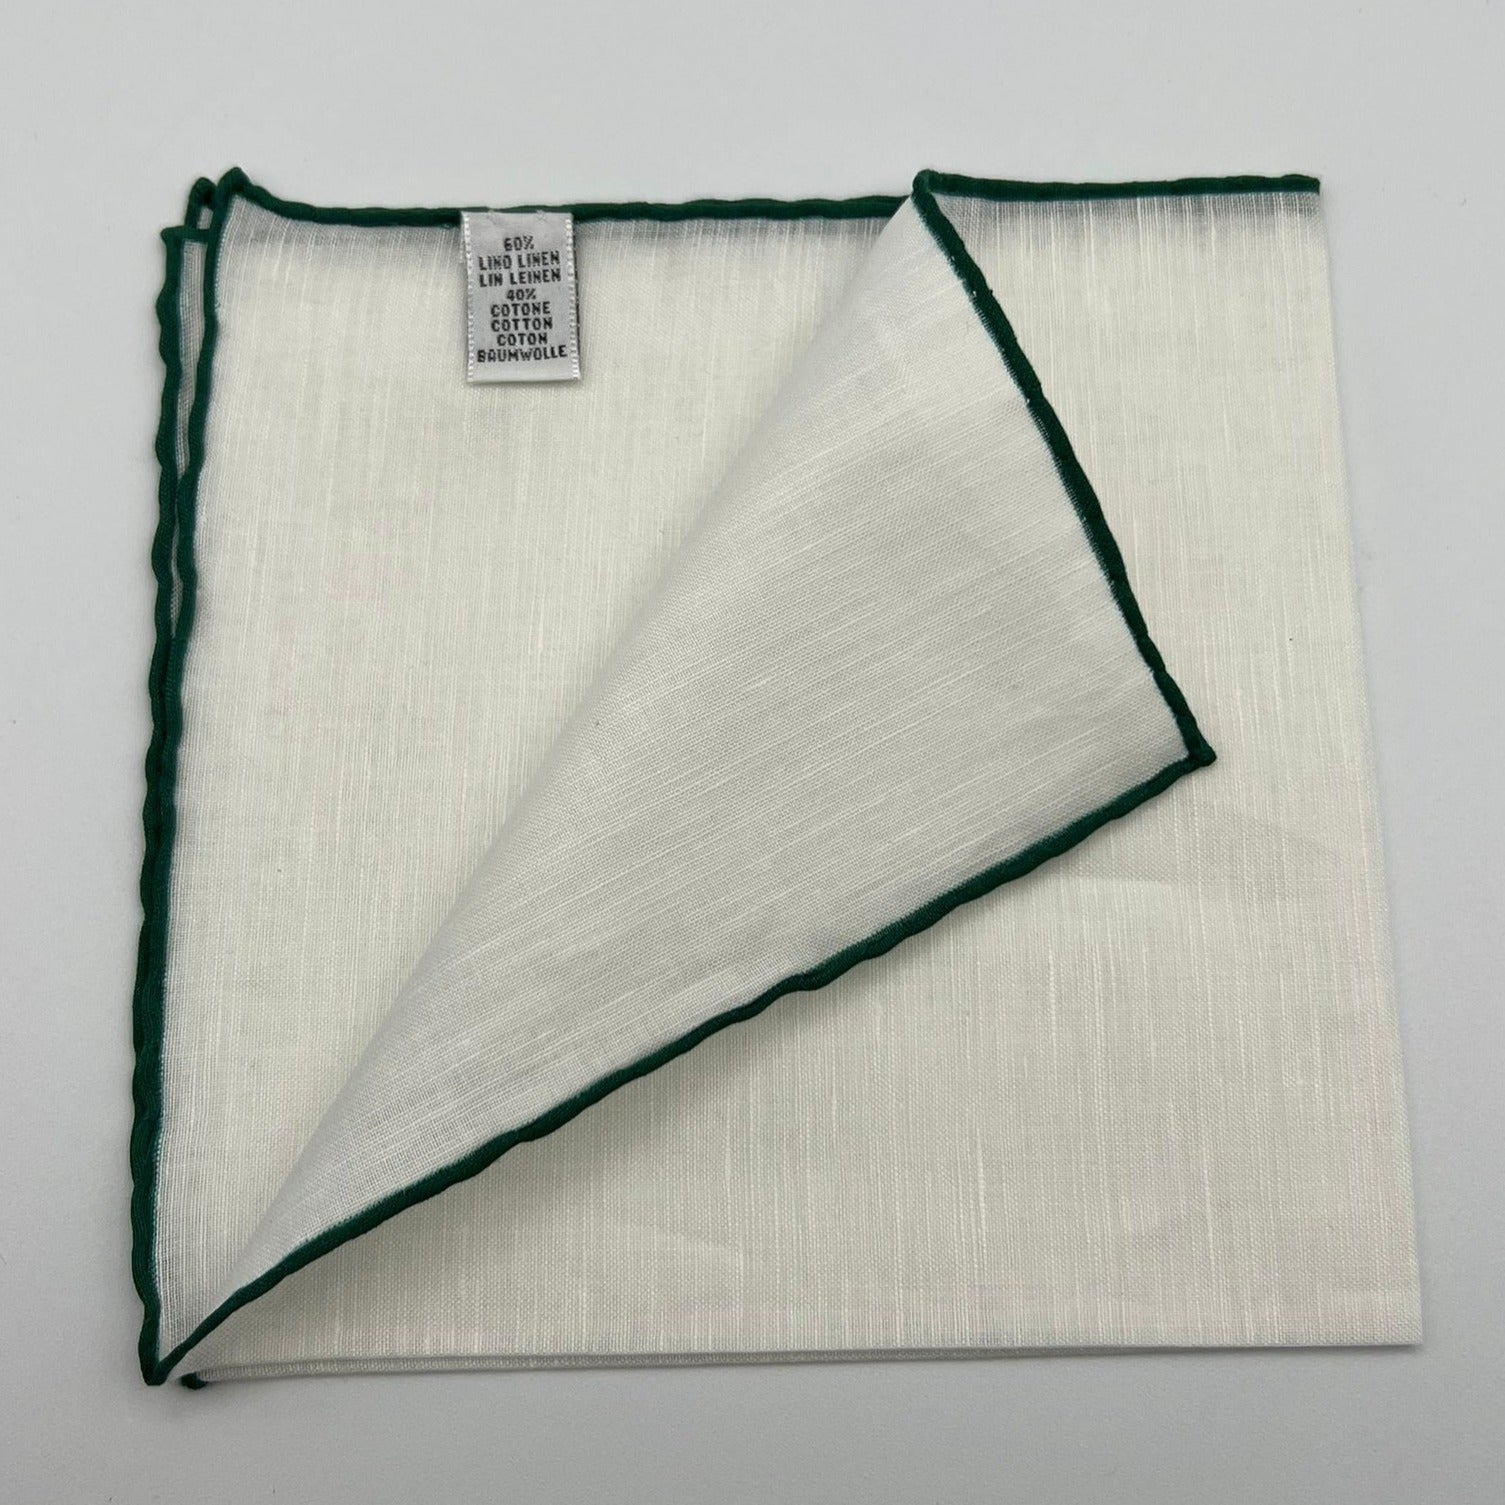 Cruciani & Bella 60%Linen 40% Cotton Hand-rolled  -  Pocket Square White and Green Handmade in Italy 33 cm X 33 cm #7513